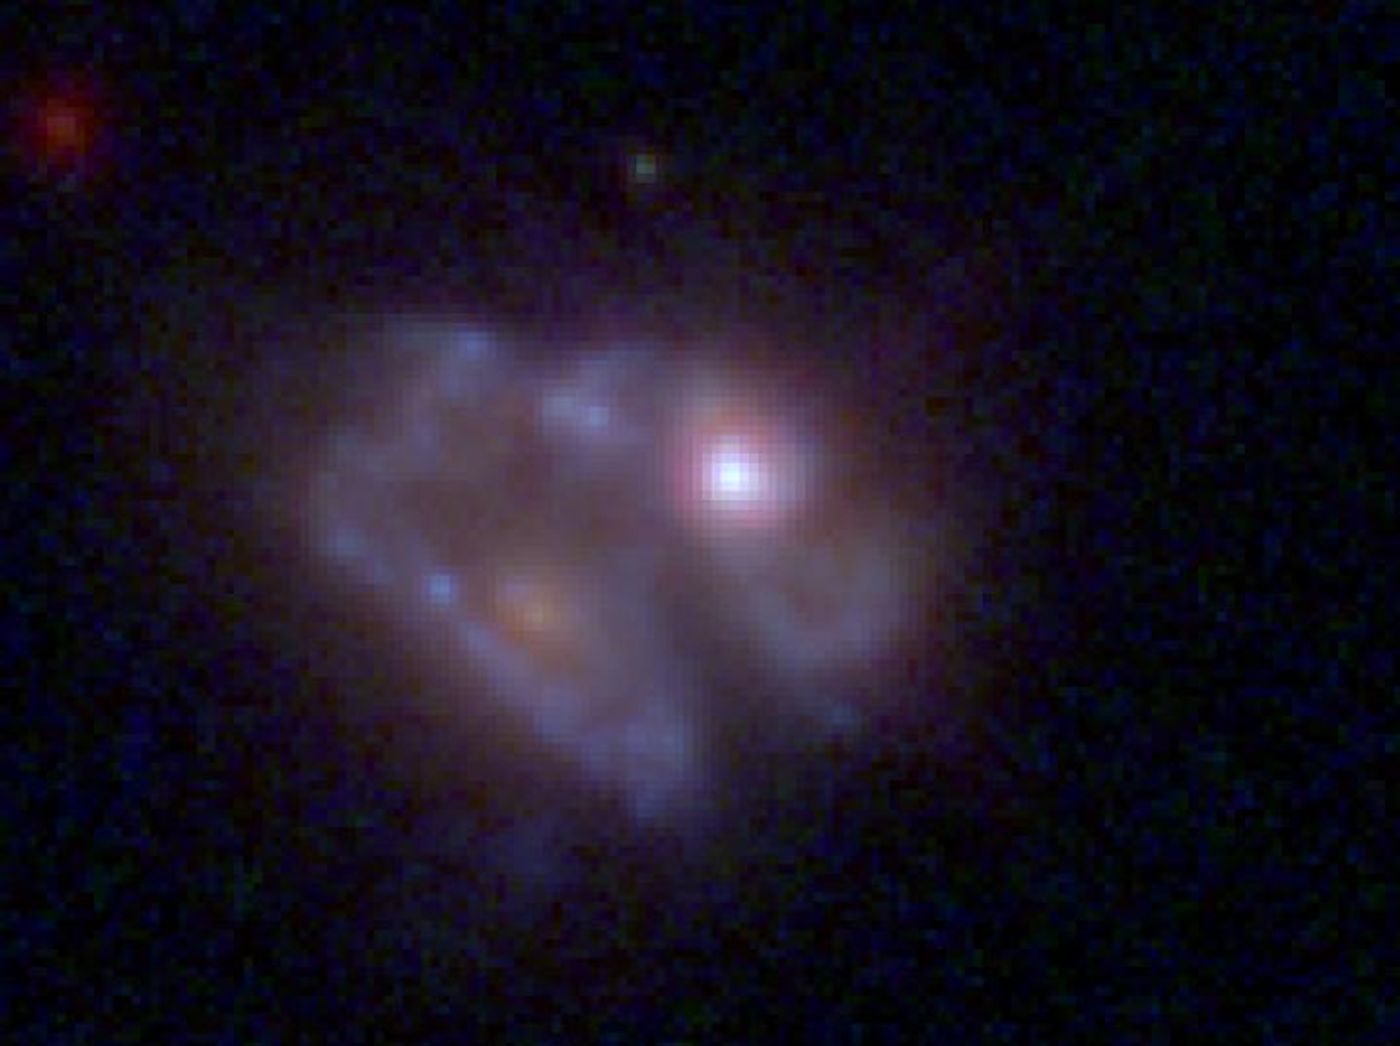 A set of galaxies observed with the Hubble Space Telescope may challenge a long-standing theory about why some galaxies stop forming new stars.